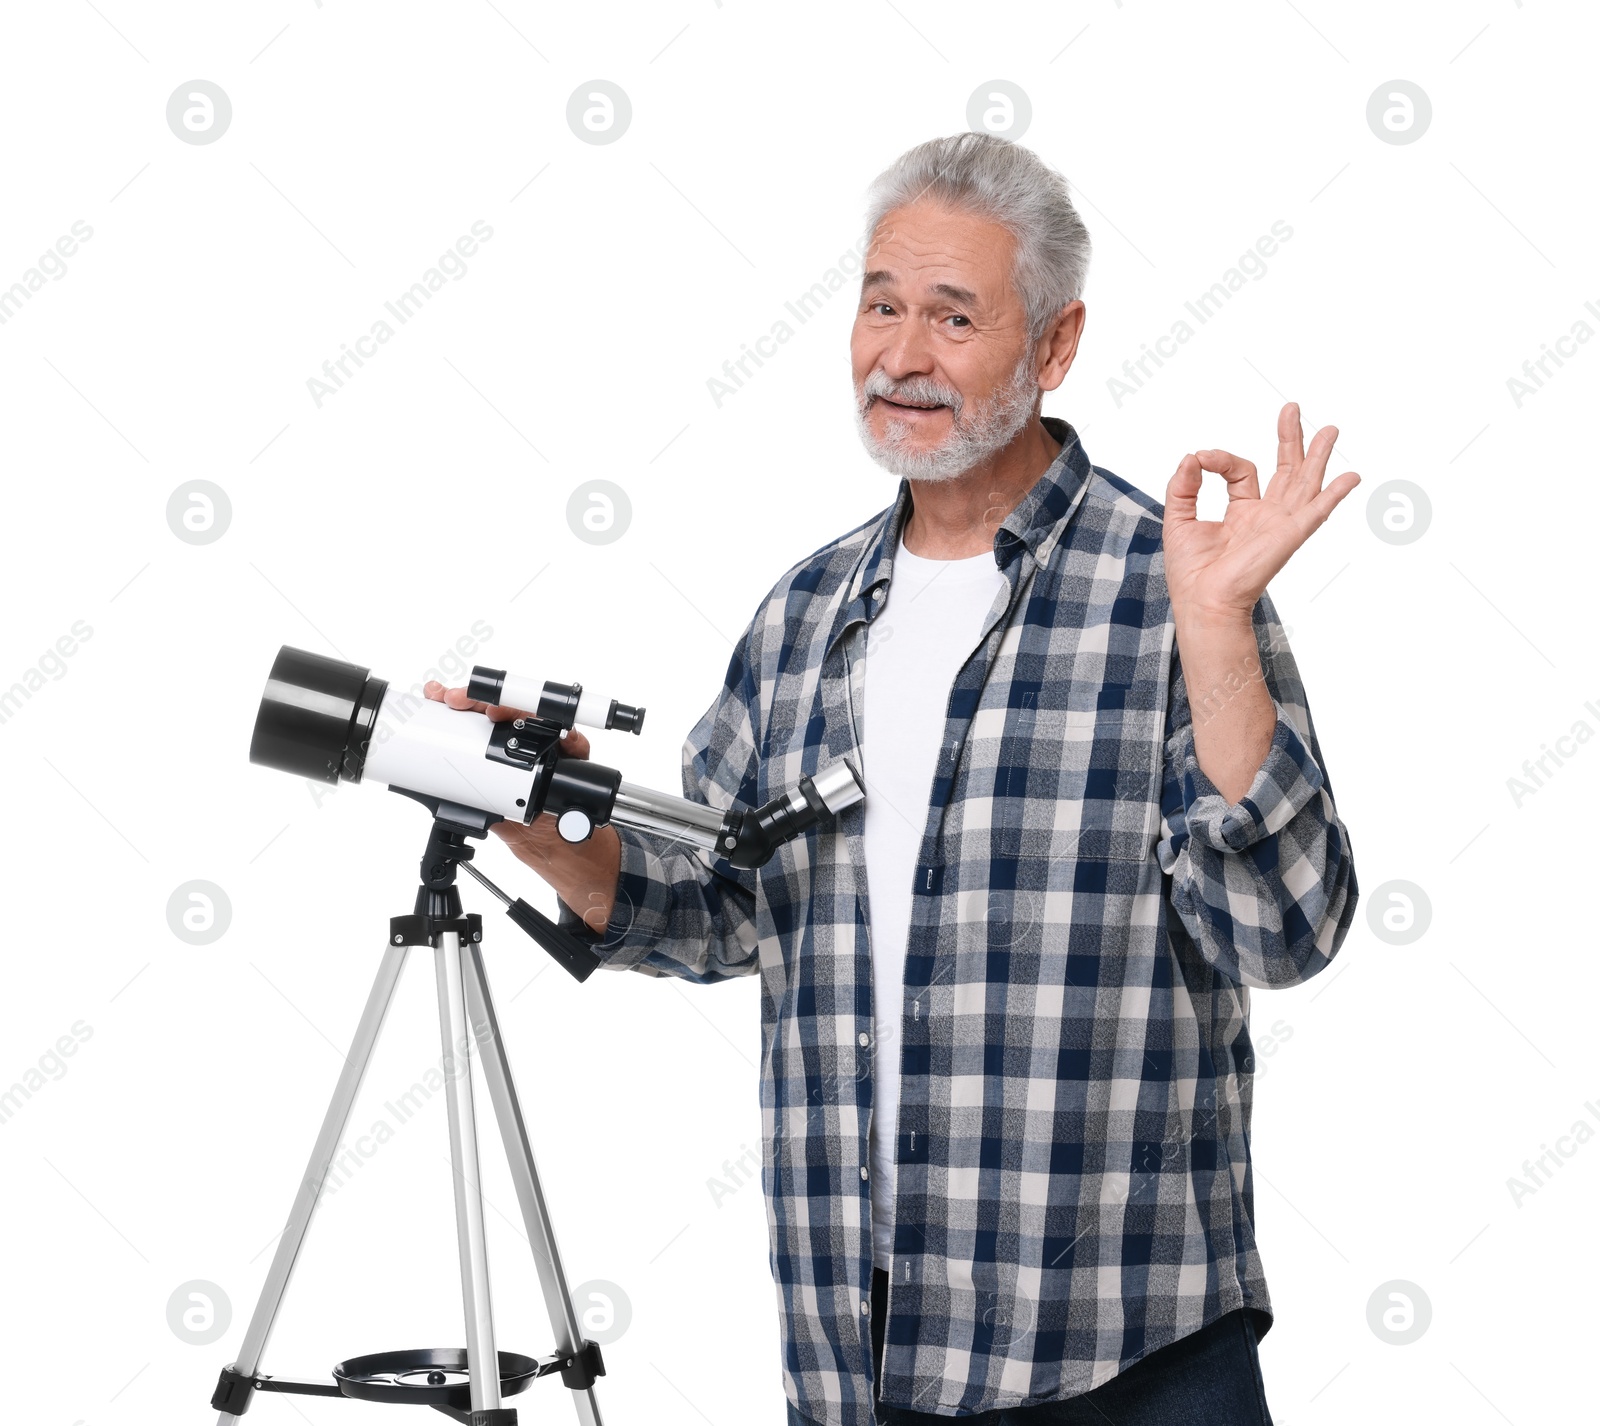 Photo of Senior astronomer with telescope showing okay gesture on white background